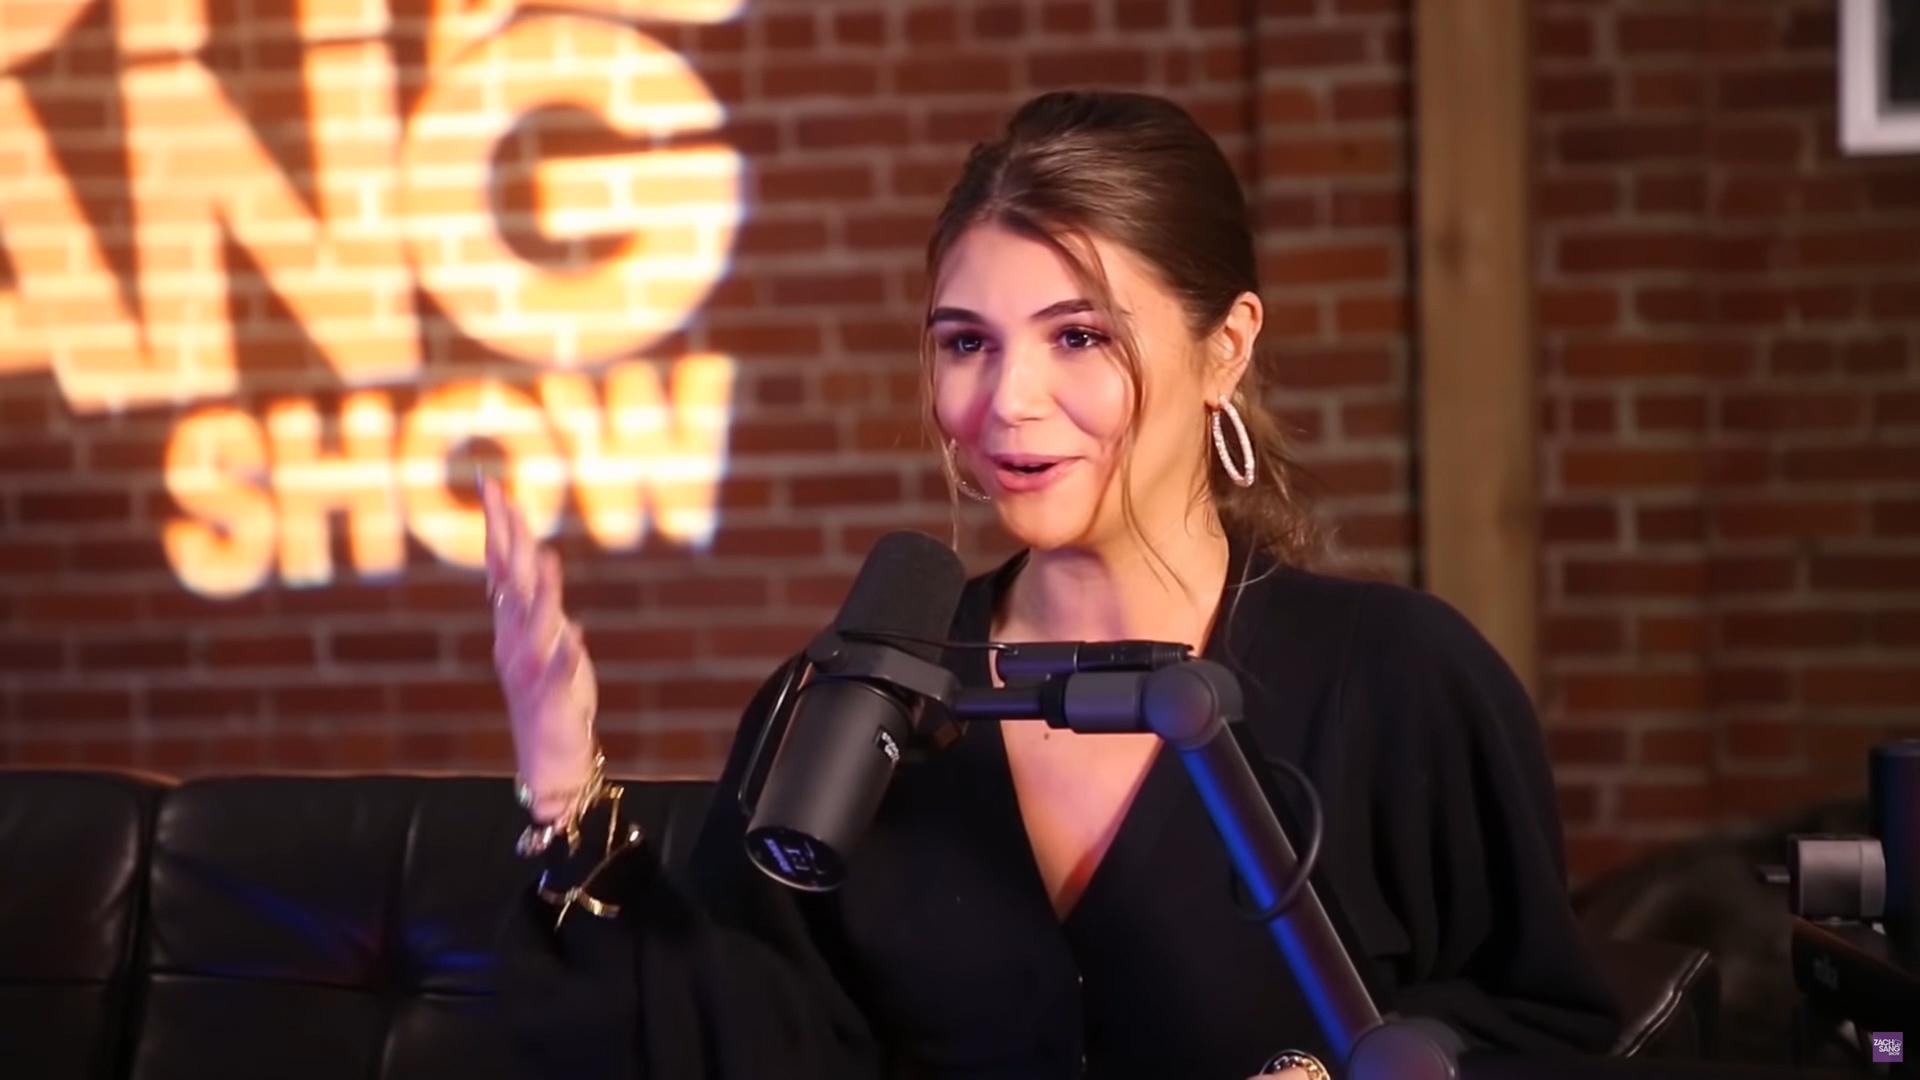 Lori Loughlin’s Daughter Olivia Jade Detailed How Parents Forced Her into College